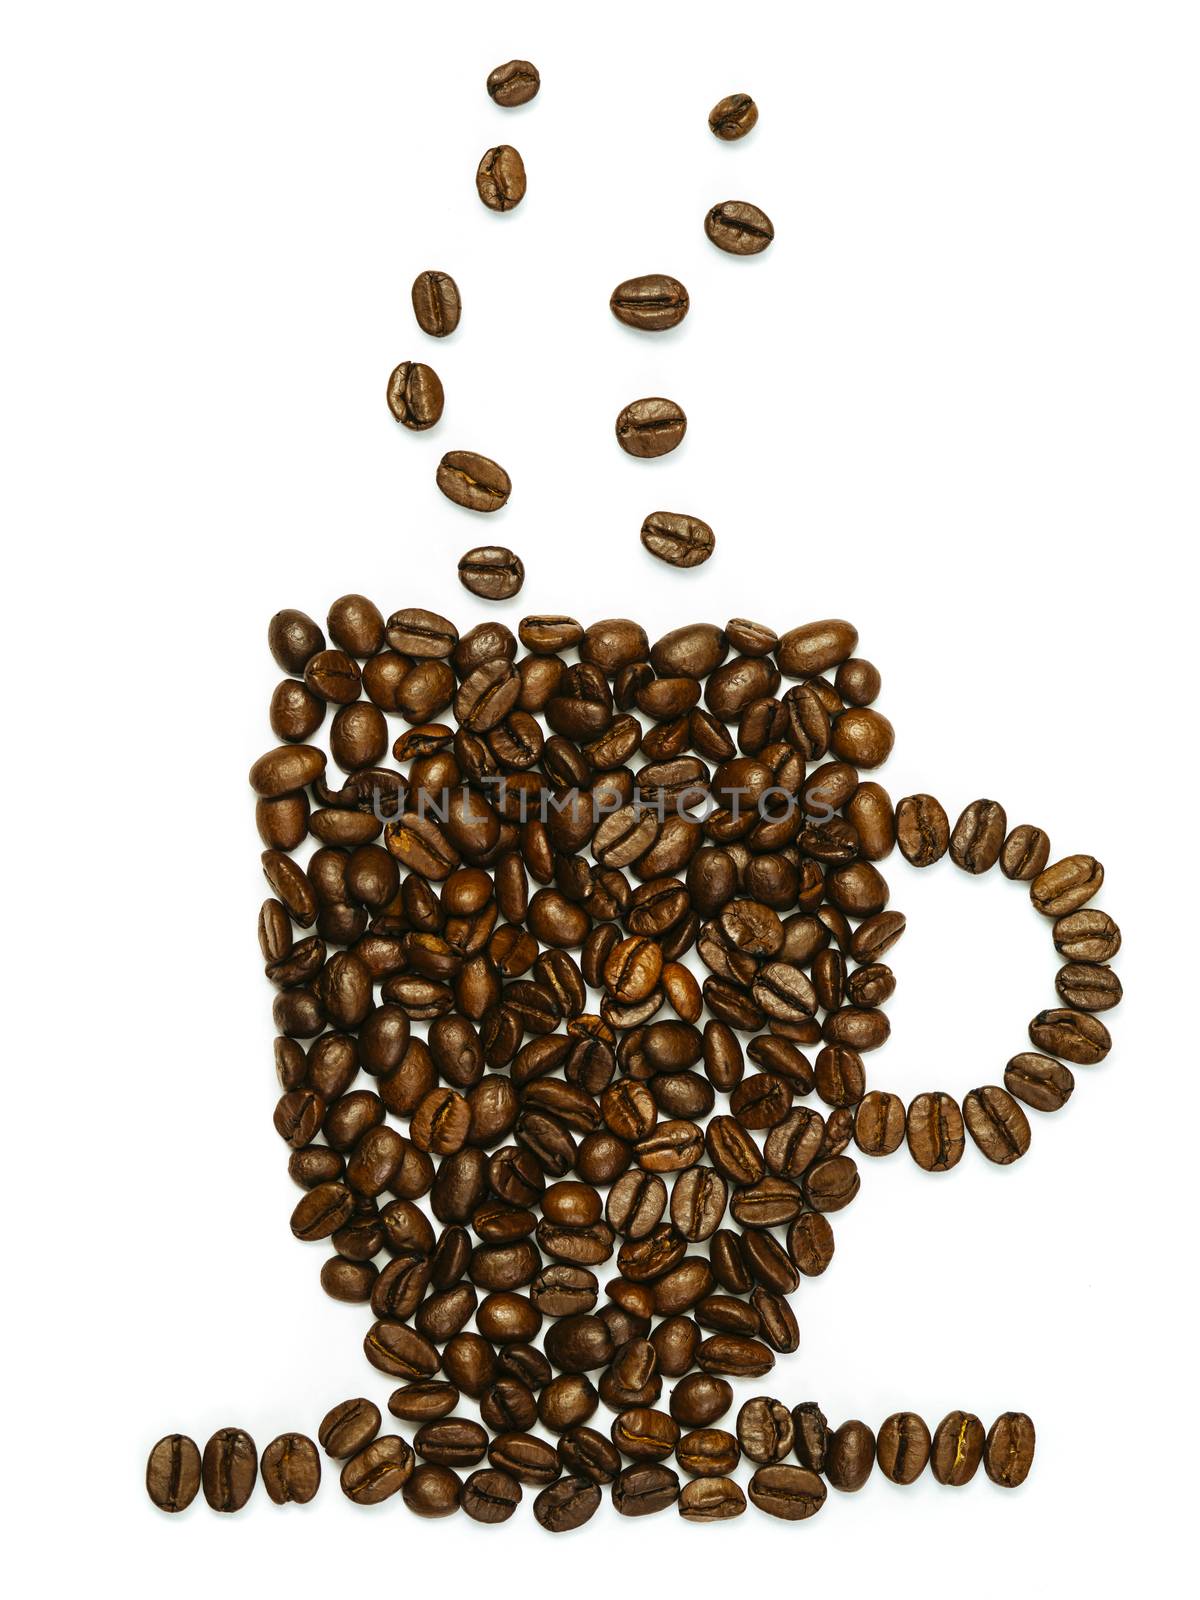 Photo of roasted coffee beans in the shape of a coffee mug.